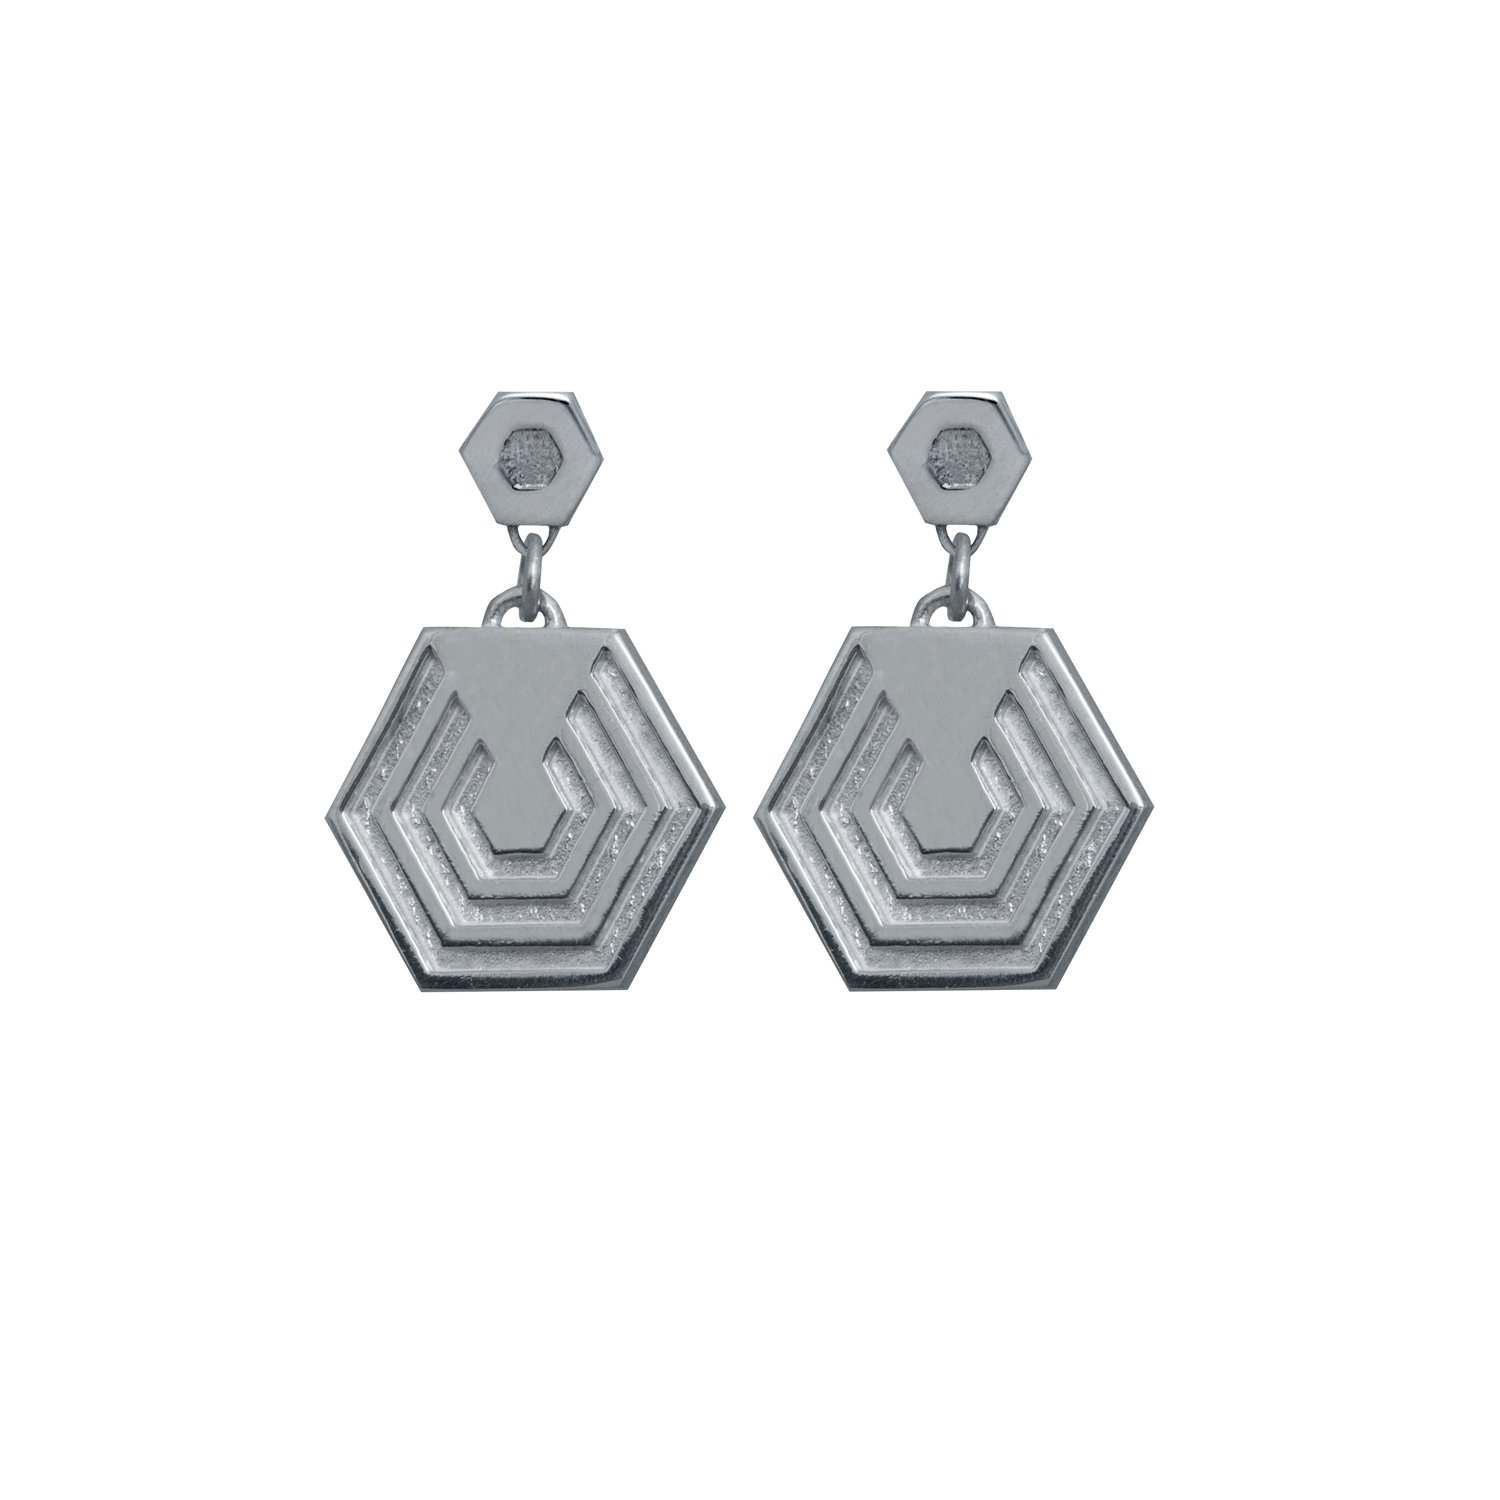 Hexagon Drop Earrings, Polished Sterling Silver, Edge Only.